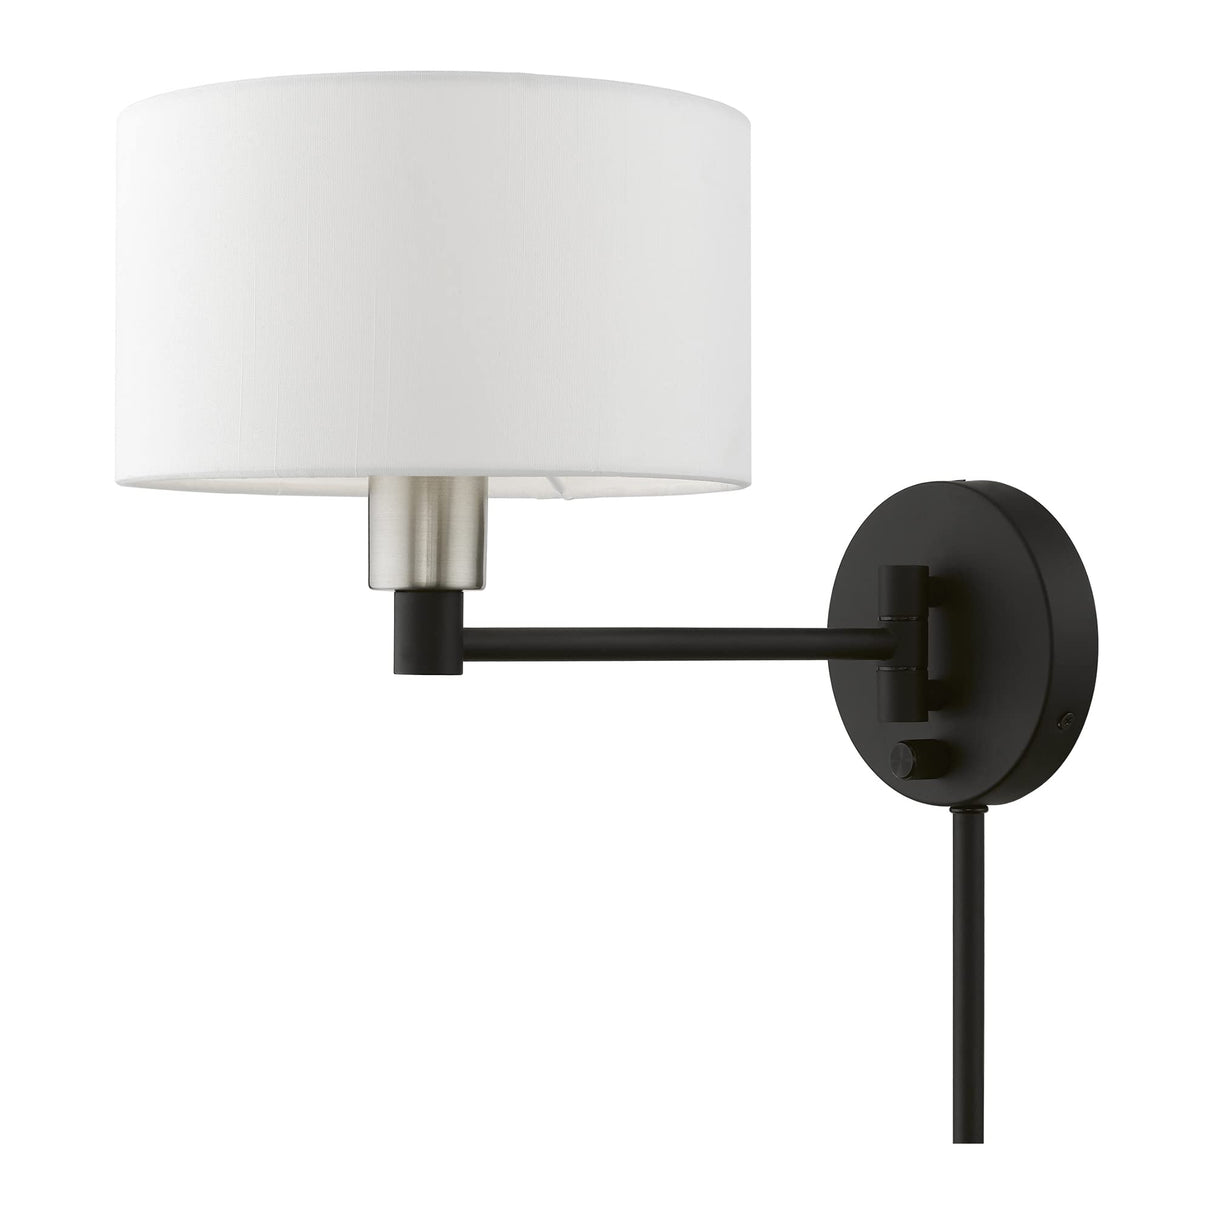 Livex Lighting 40080-04 1 Light Swing Arm Wall Lamp, Black with Brushed Nickel Accent, 9 x 9.75